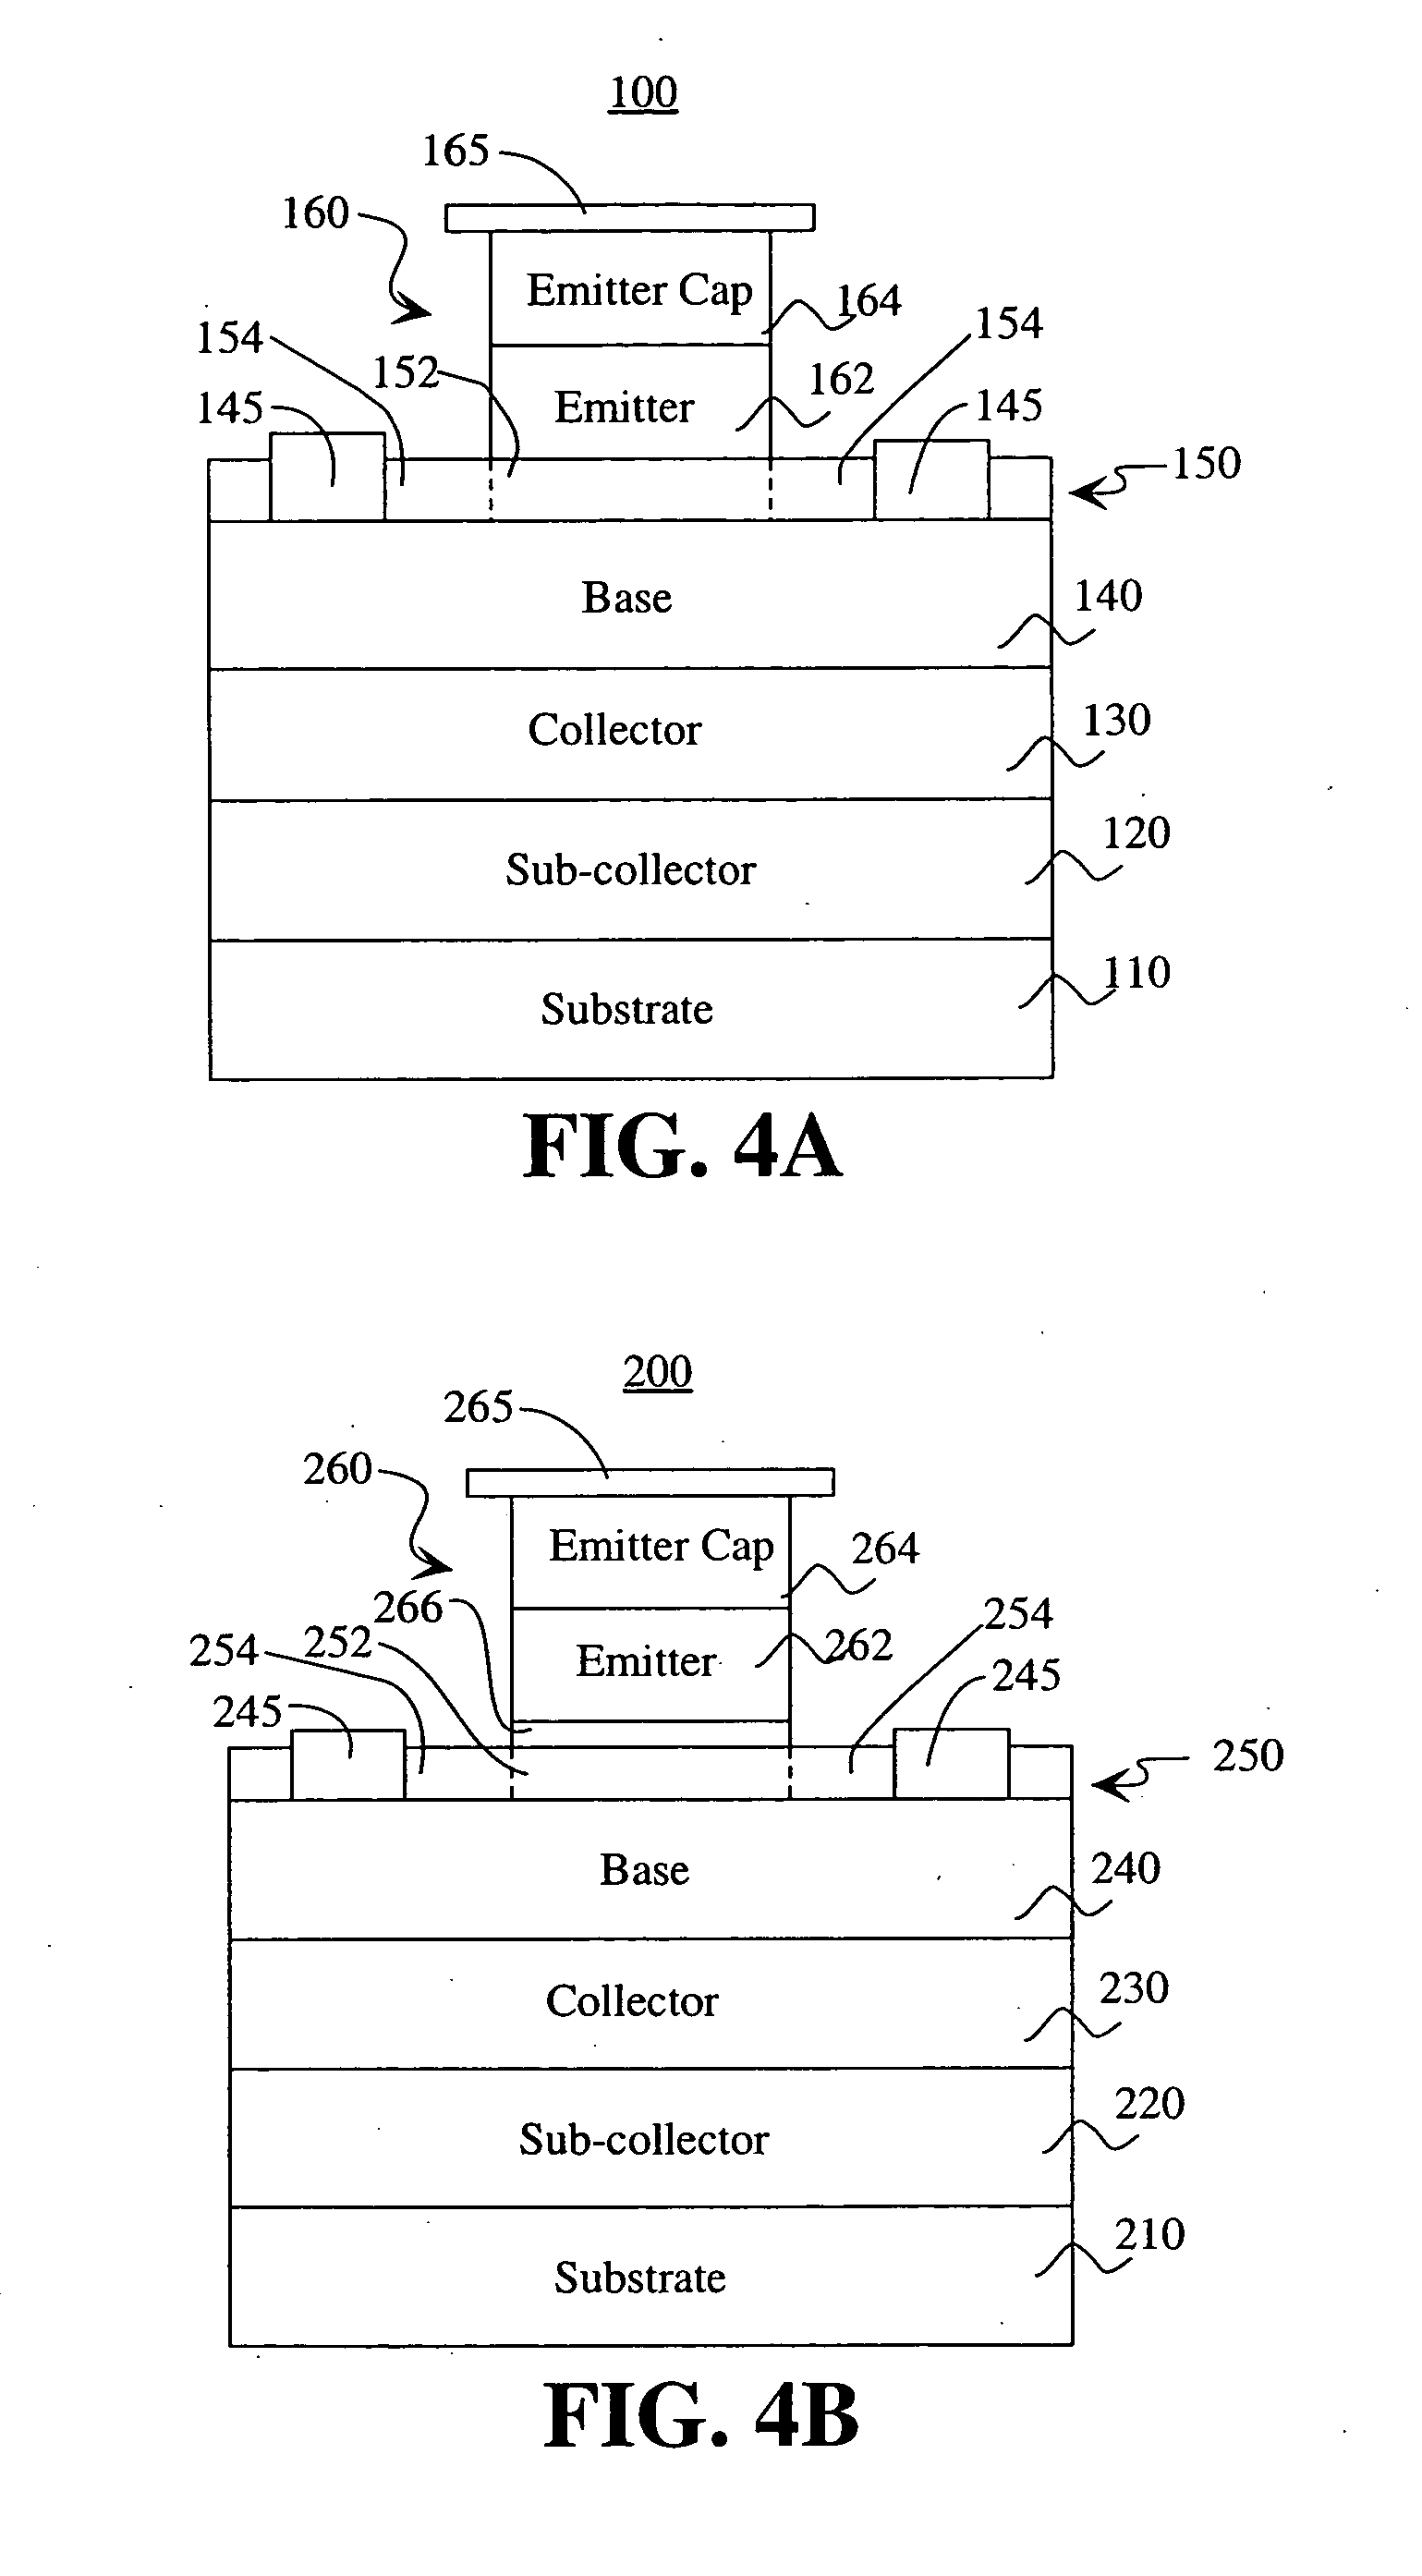 Semiconductor structure for a heterojunction bipolar transistor and a method of making same